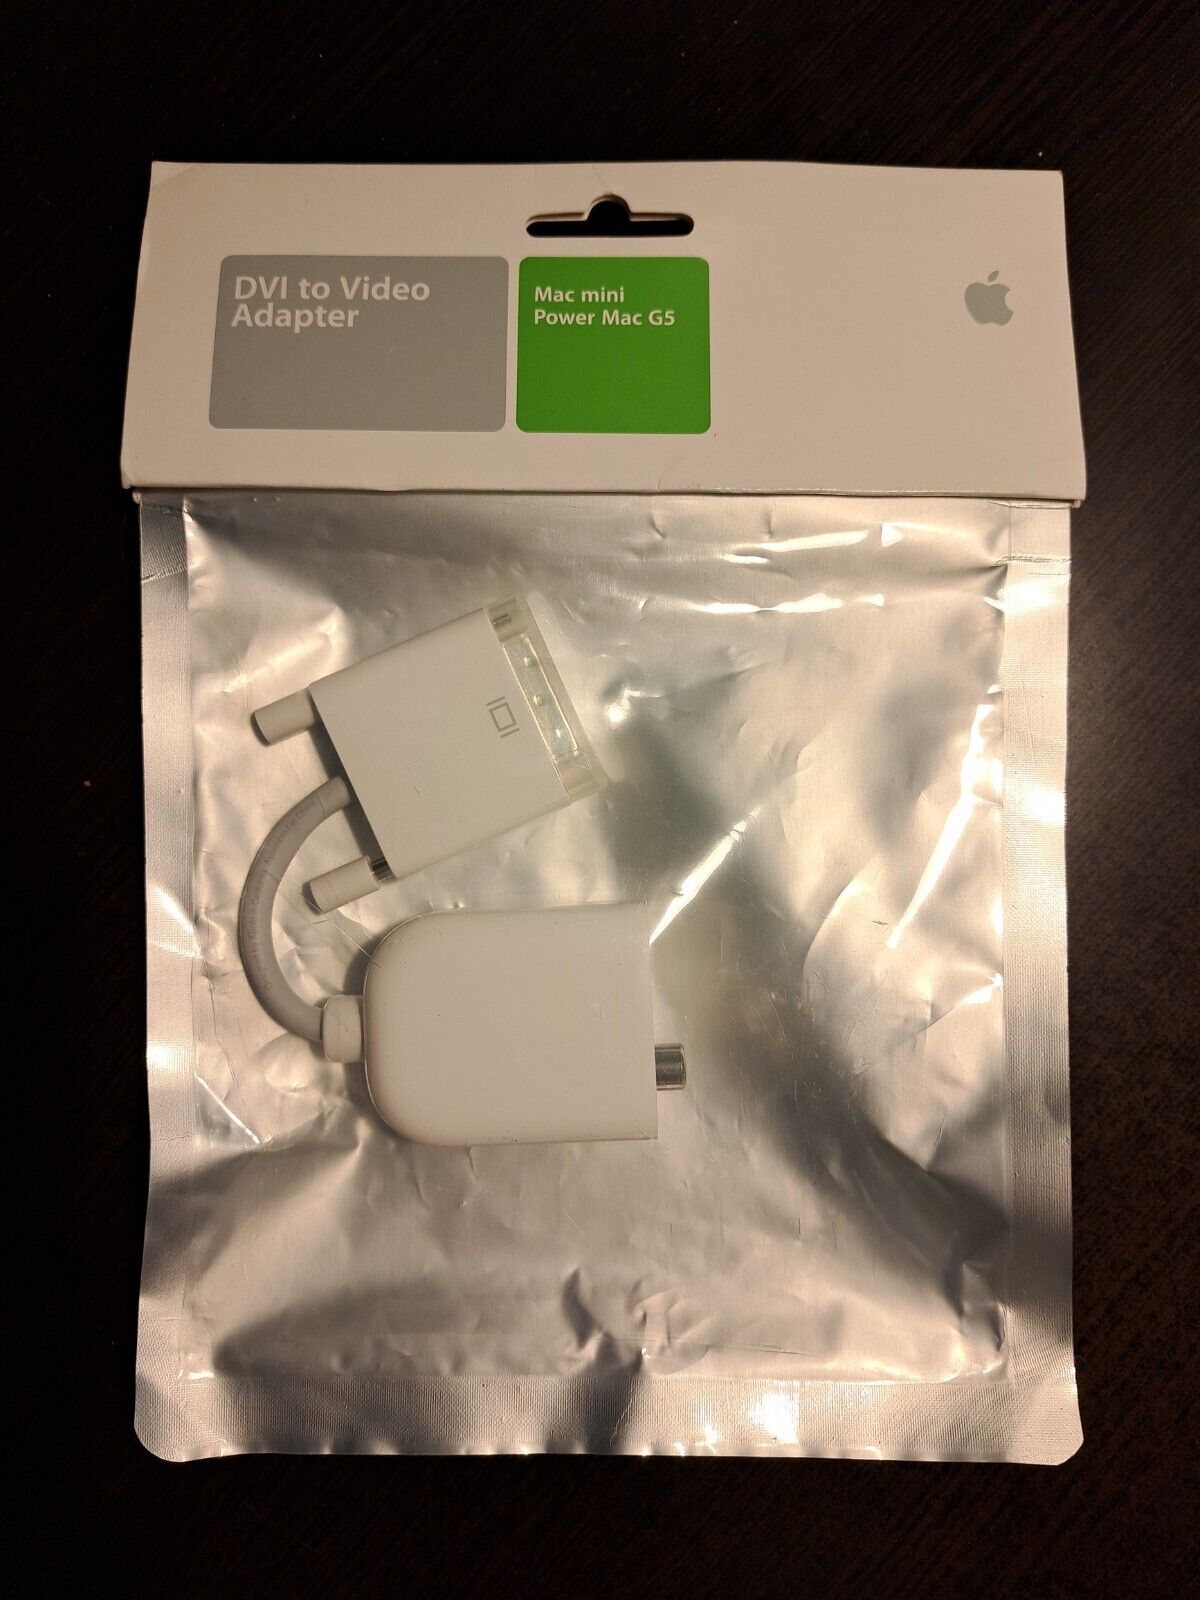 Apple OEM DVI To Video Adapter (M9267G/A) - White